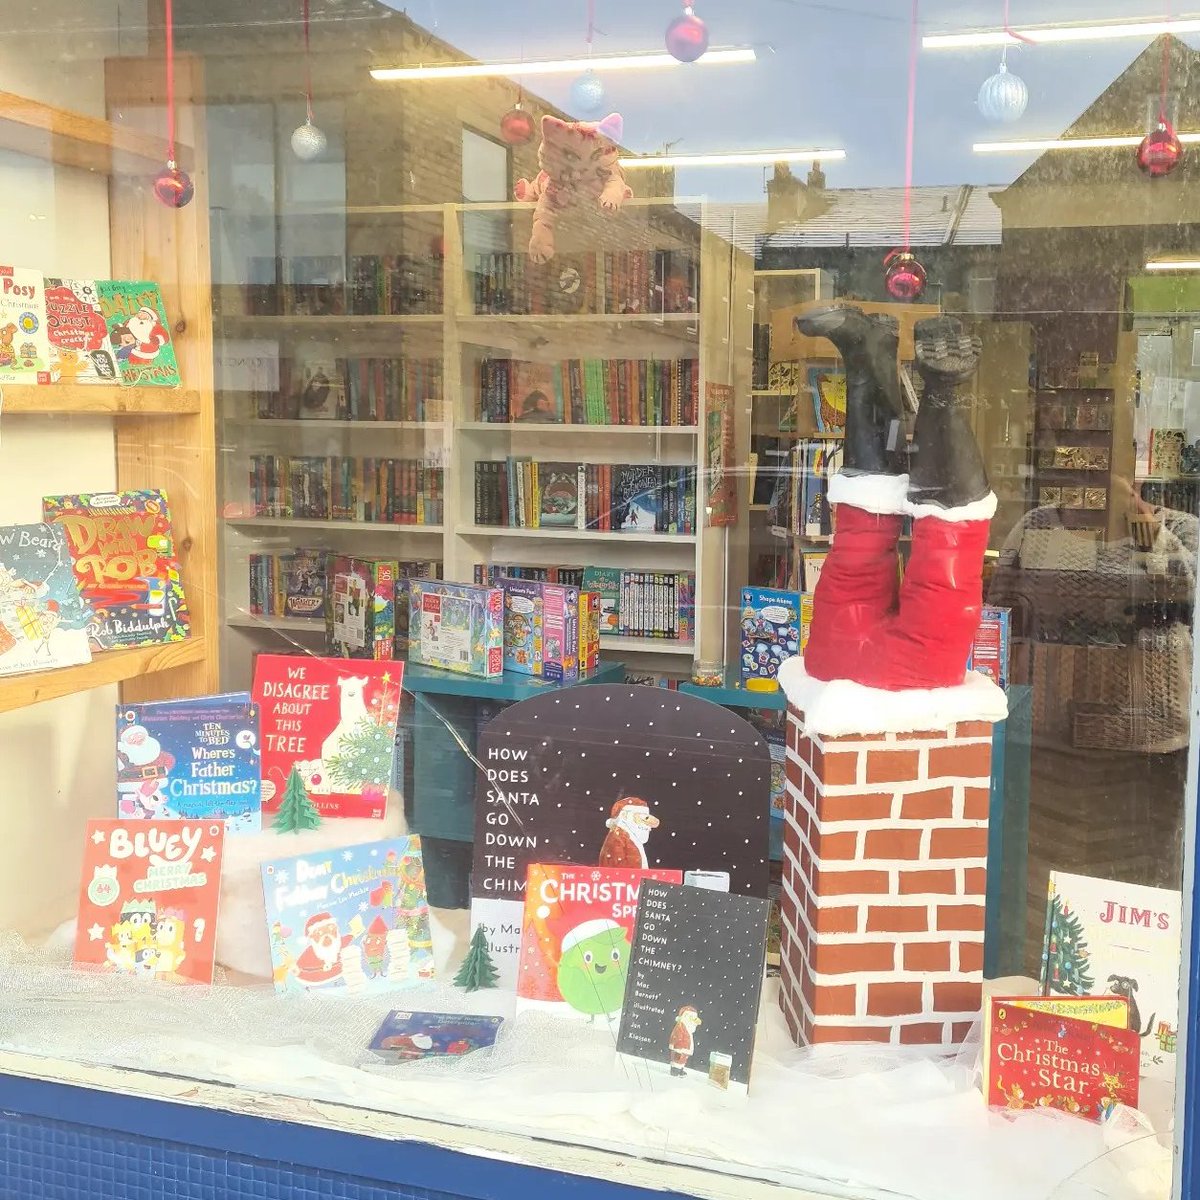 As Christmas draws near, we've been thrilled by the fantastic window displays. Wishing everyone a delightful weekend! 🎄 Show your support for @Lindley_Books, @StorytellersInc, @BurwayBooks, and @whitehorsebooks on Hive or visit them in-store! 📚 #choosebookshops #bookshops